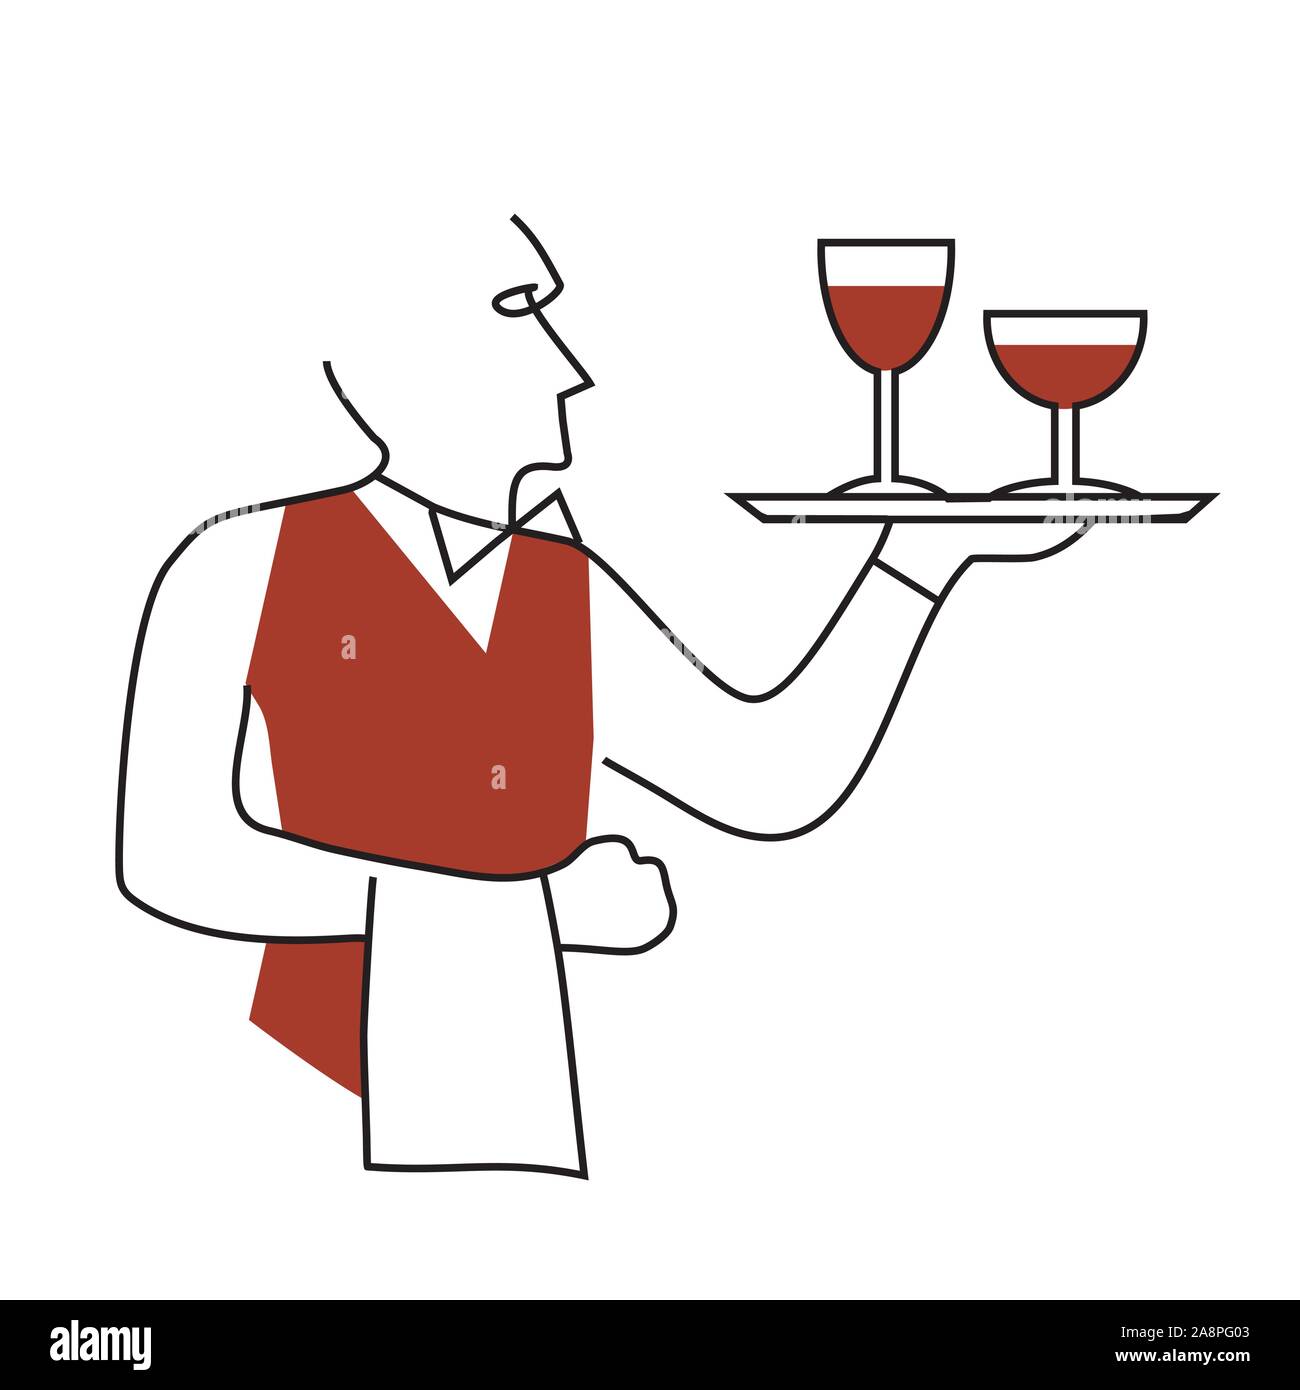 Waiter serving wine, cartoon. Line art stylized illustration of a waiter in red vest serving red wine. Isolated on white background. Vector available. Stock Vector